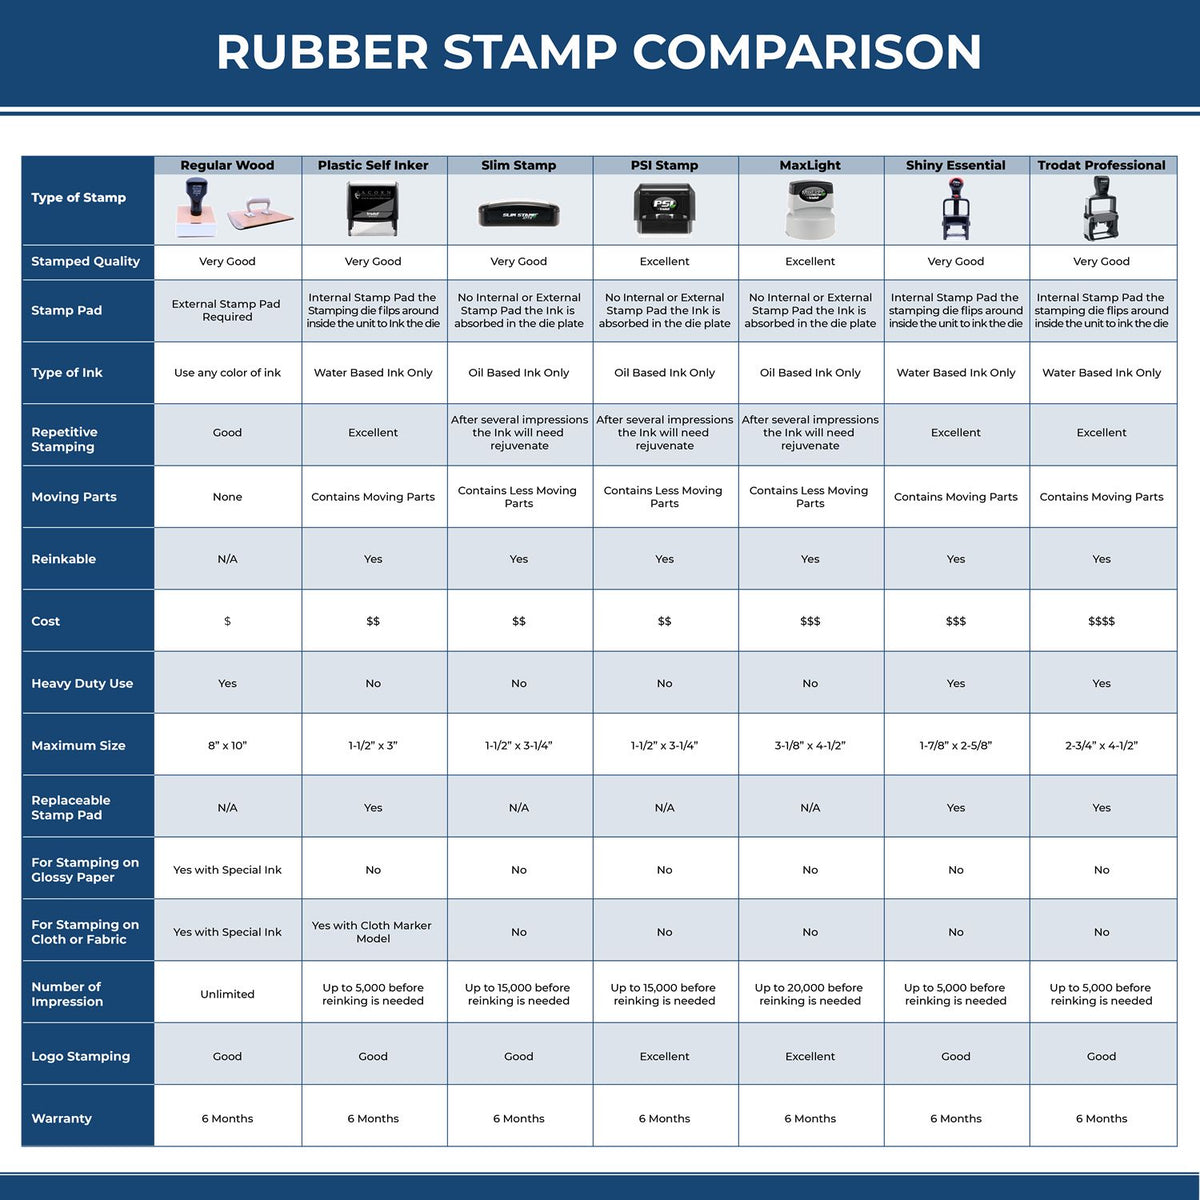 Large Self Inking Blue Shield Stamp 4533S Rubber Stamp Comparison